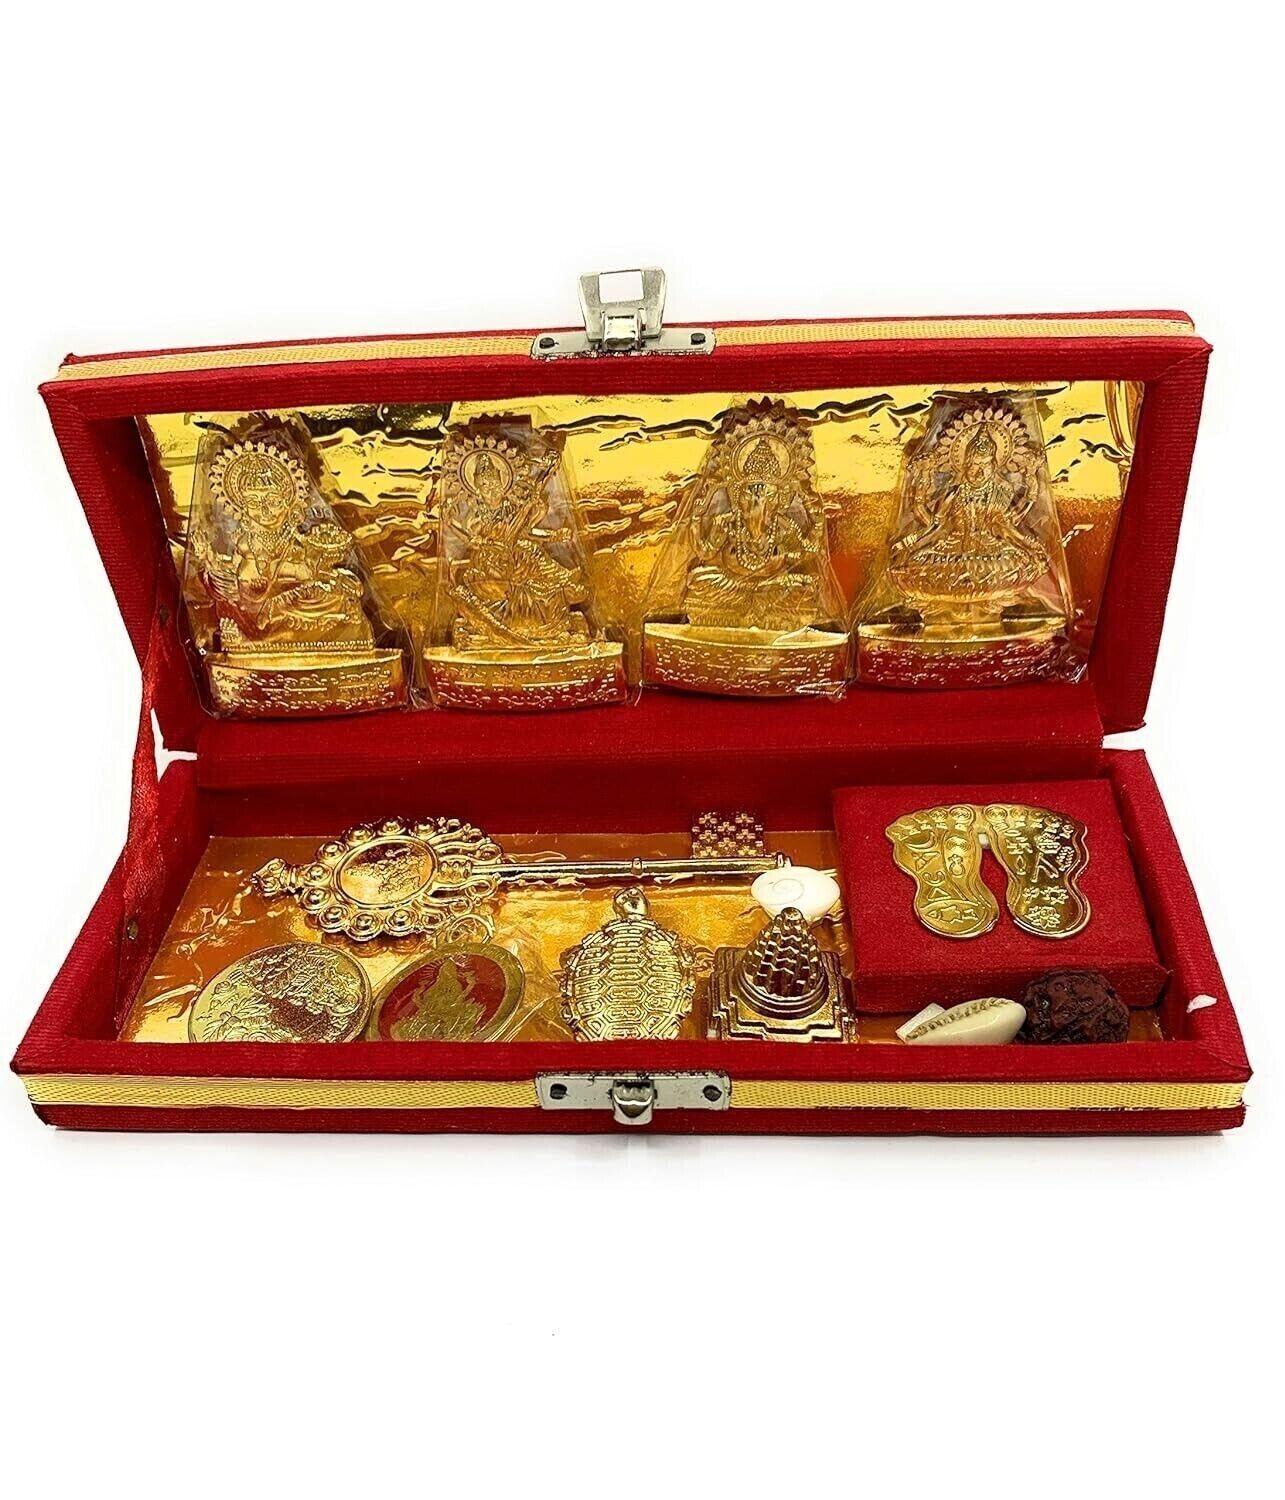 Kuber Dhan Laxmi Yantra for Diwali puja, Home, Temple, Office